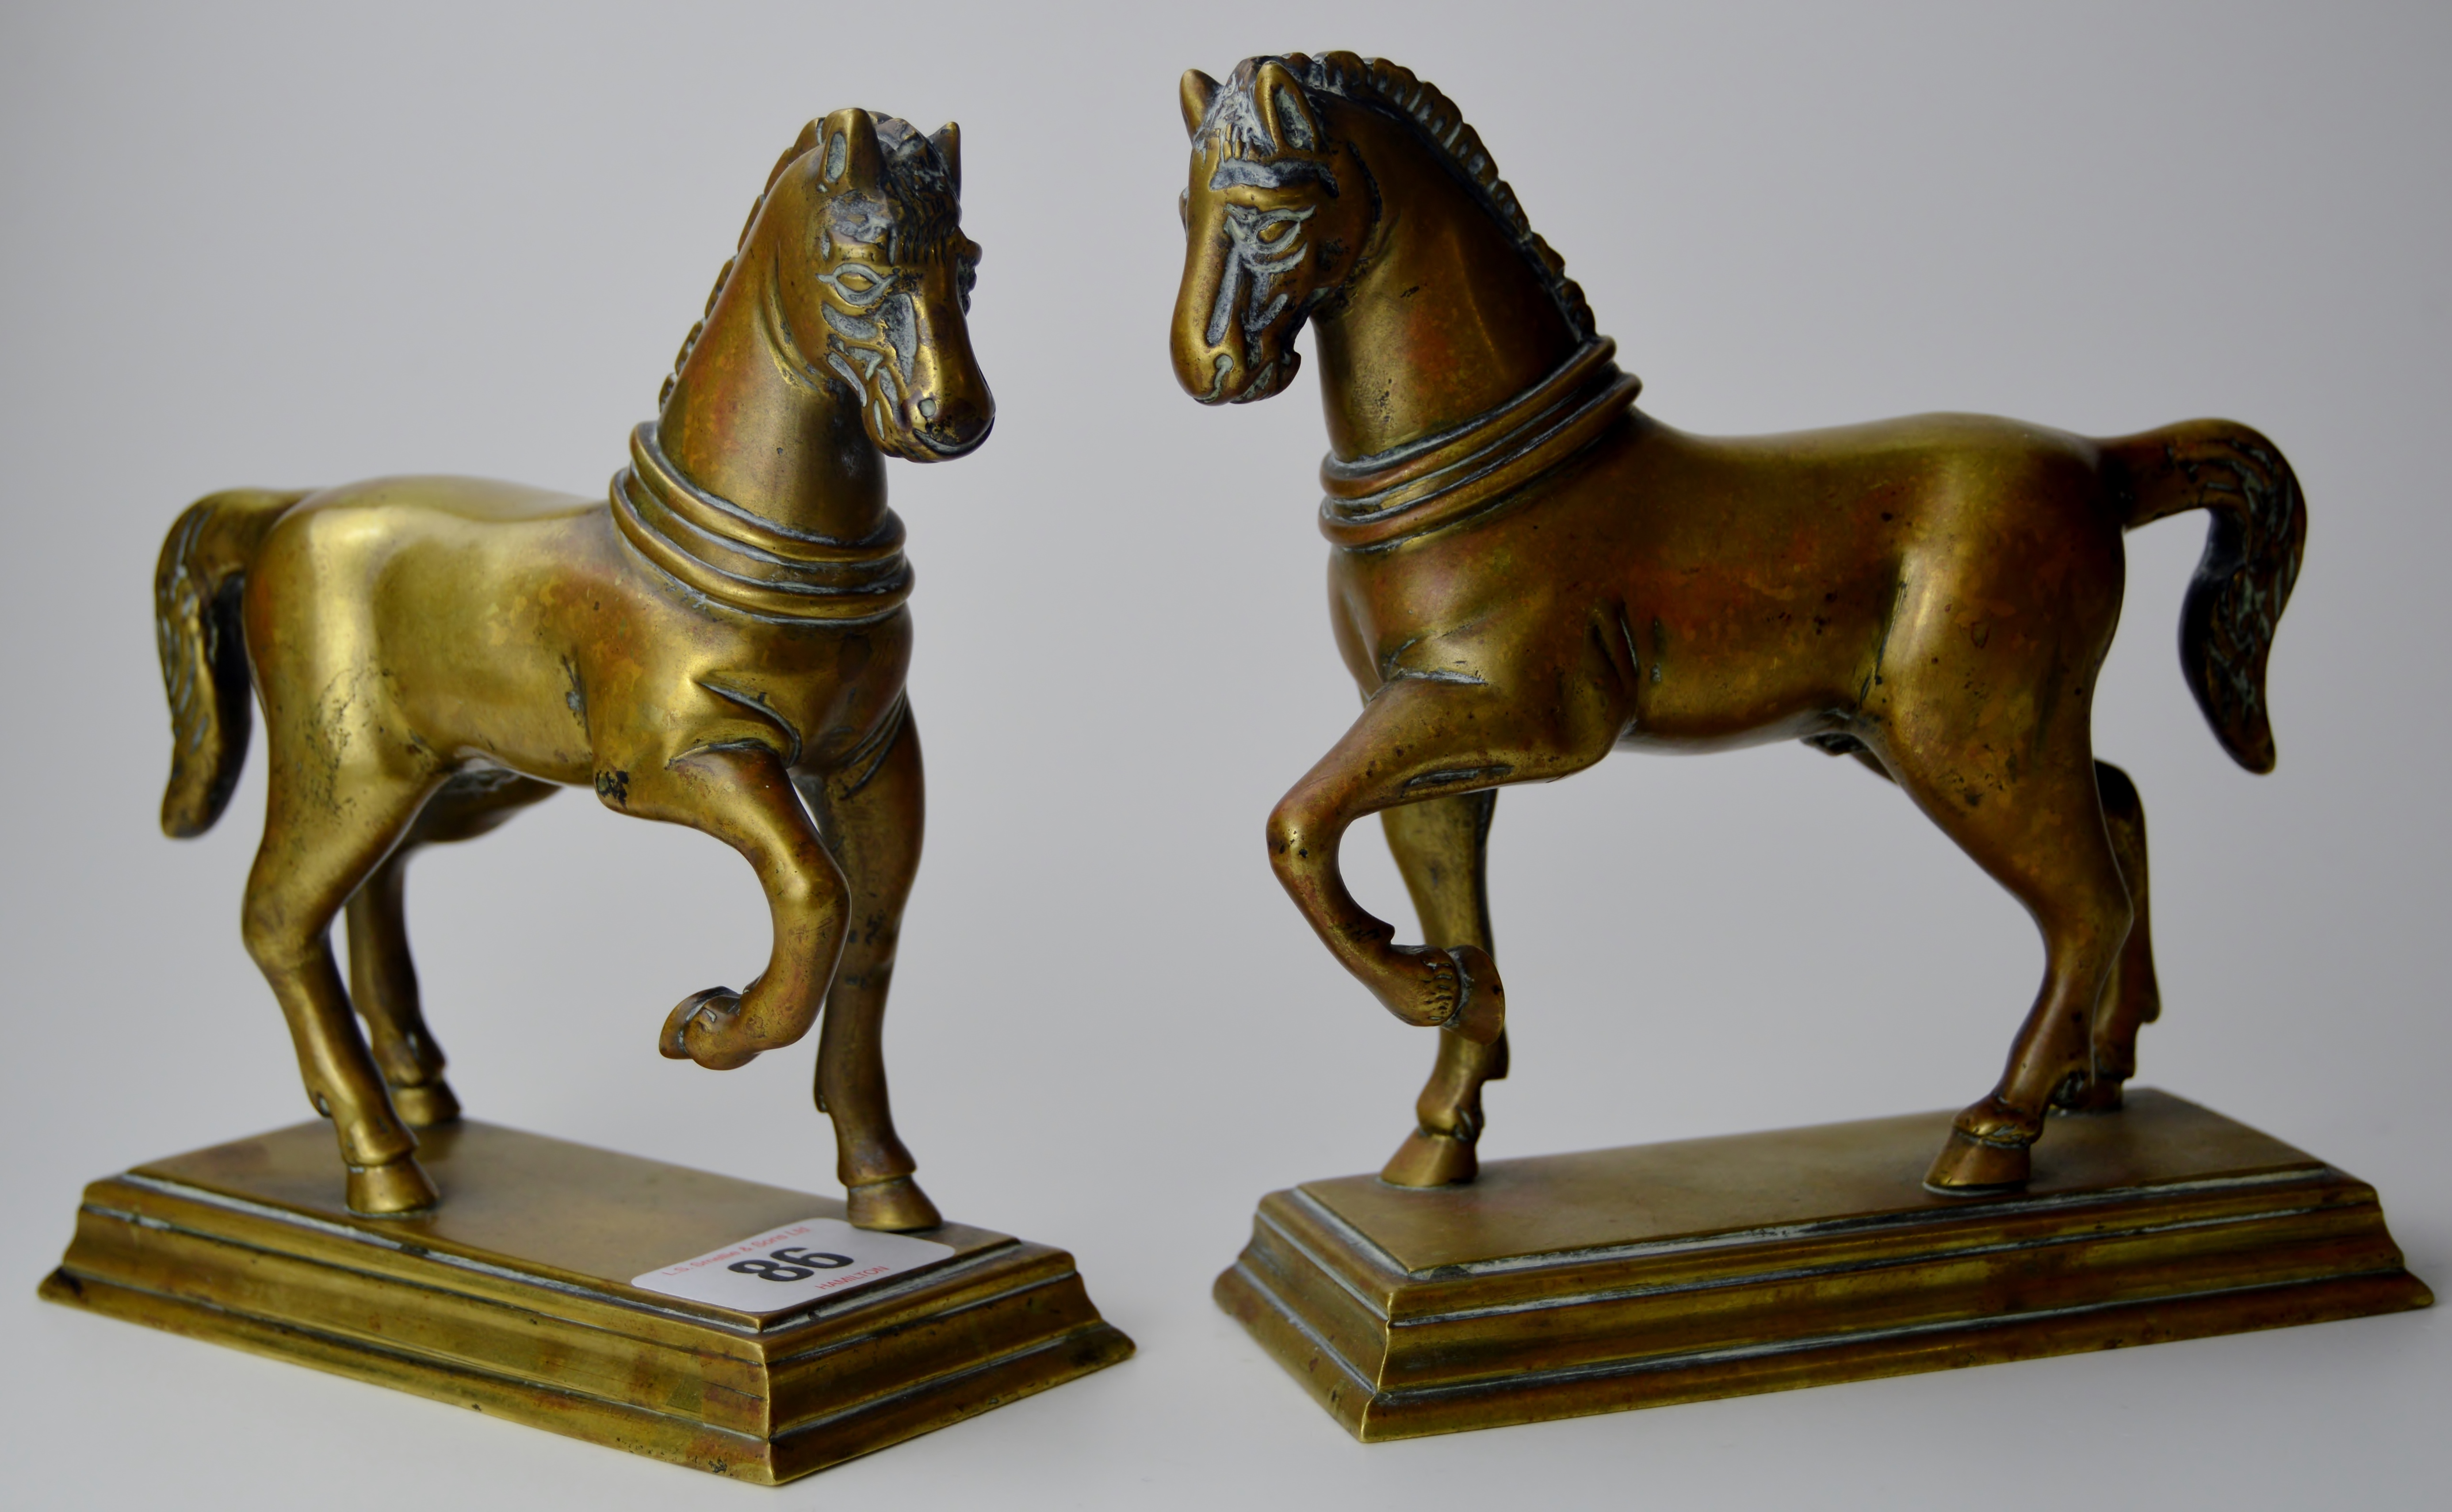 PAIR OF VICTORIAN HEAVY BRASS LEFT & RIGHT STATUETTES FORMED AS ROMAN STYLE HORSES MOUNTED ON